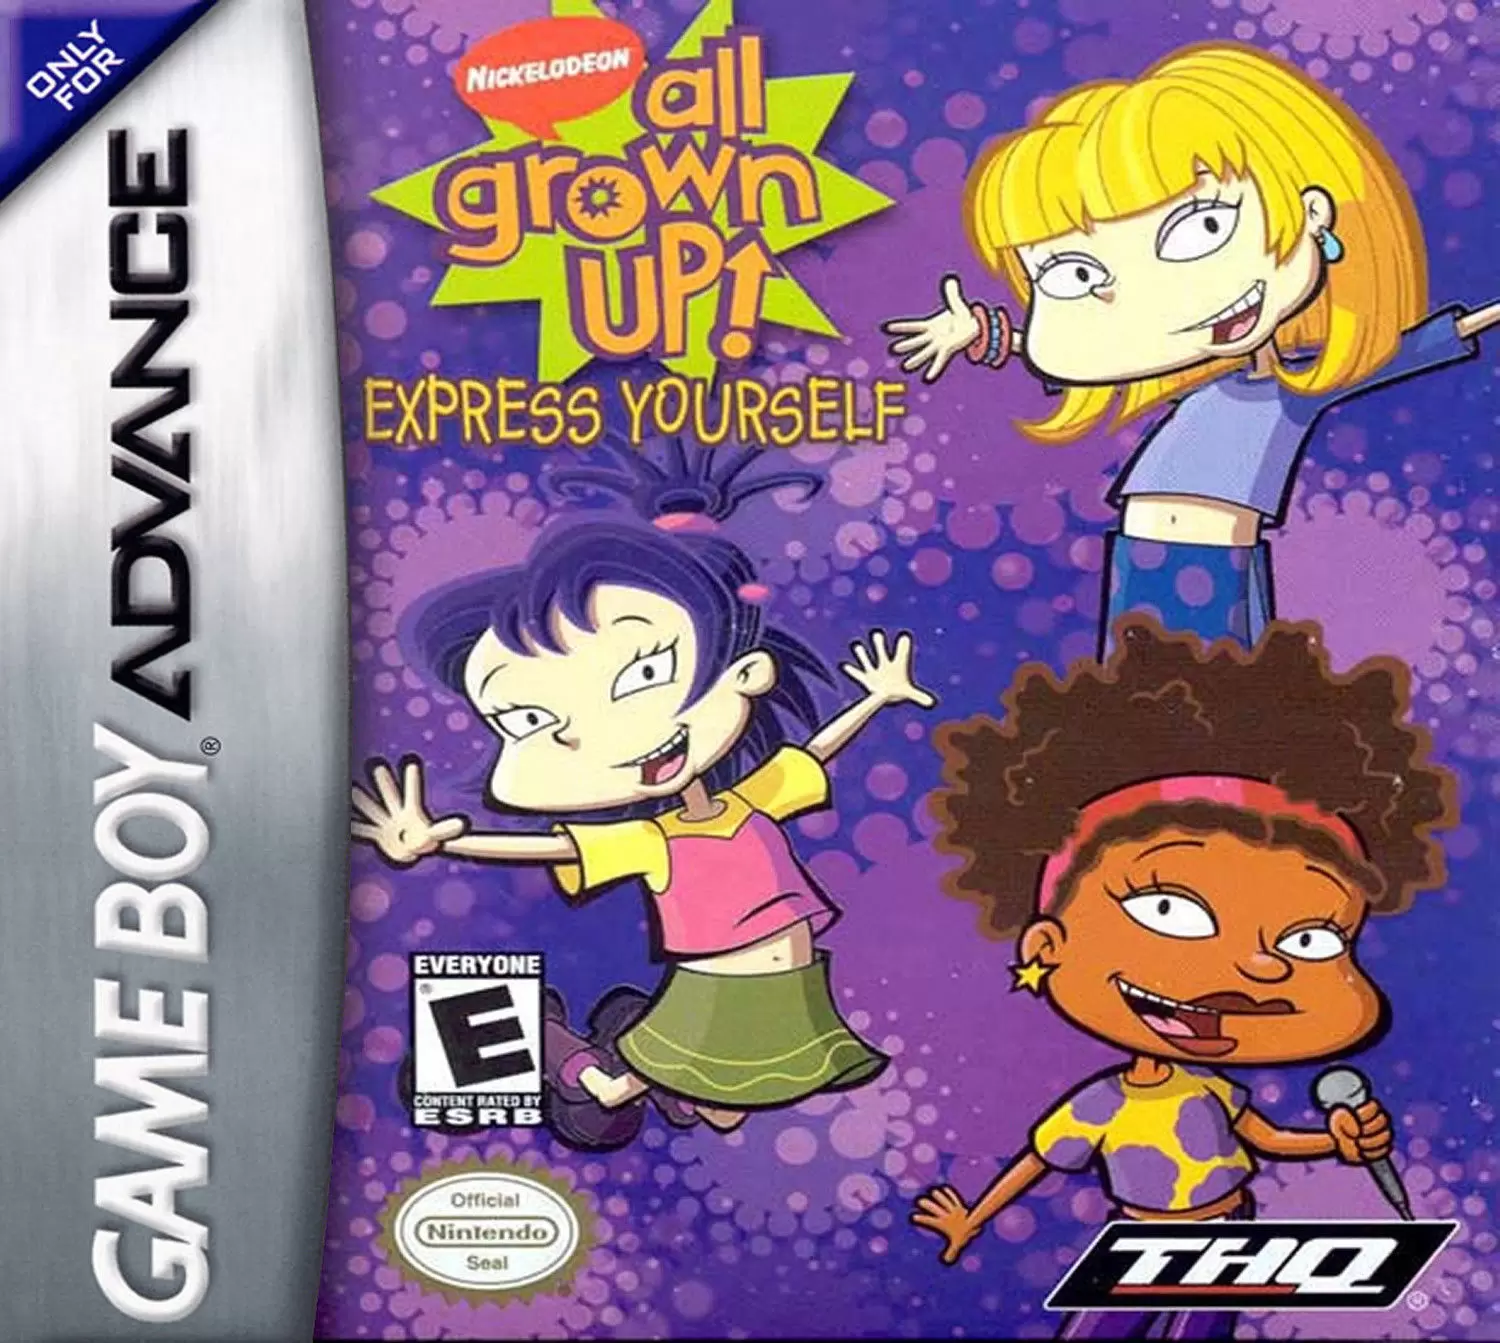 Game Boy Advance Games - All Grown Up! Express Yourself